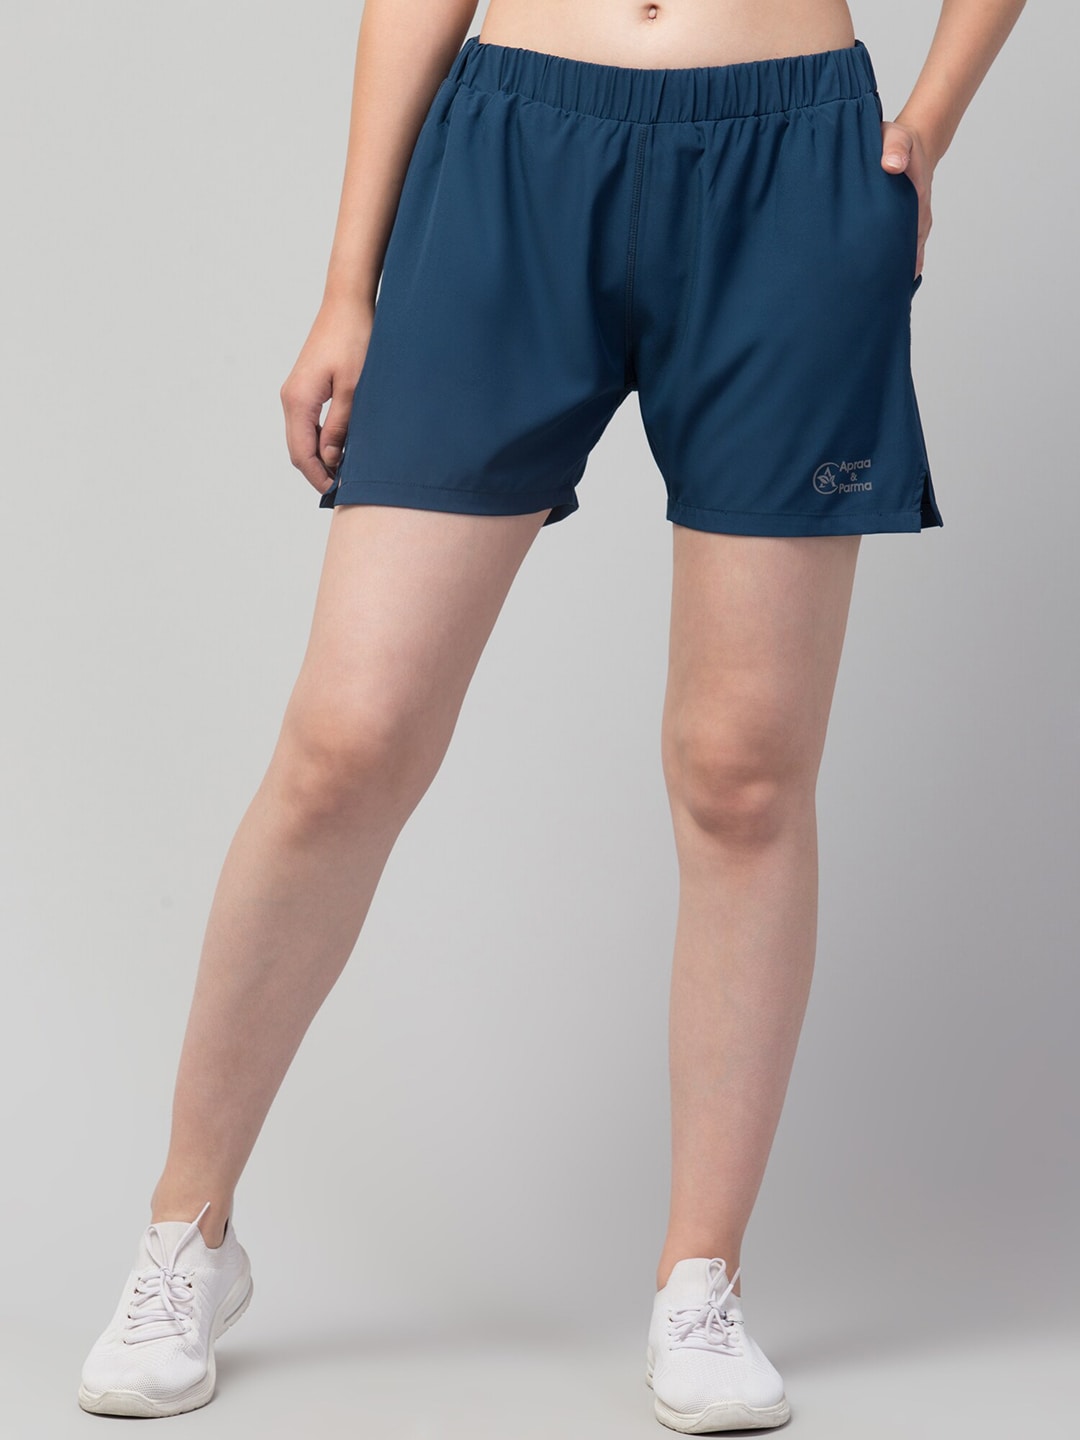 Apraa & Parma Women Outdoor e-Dry Technology Shorts Price in India